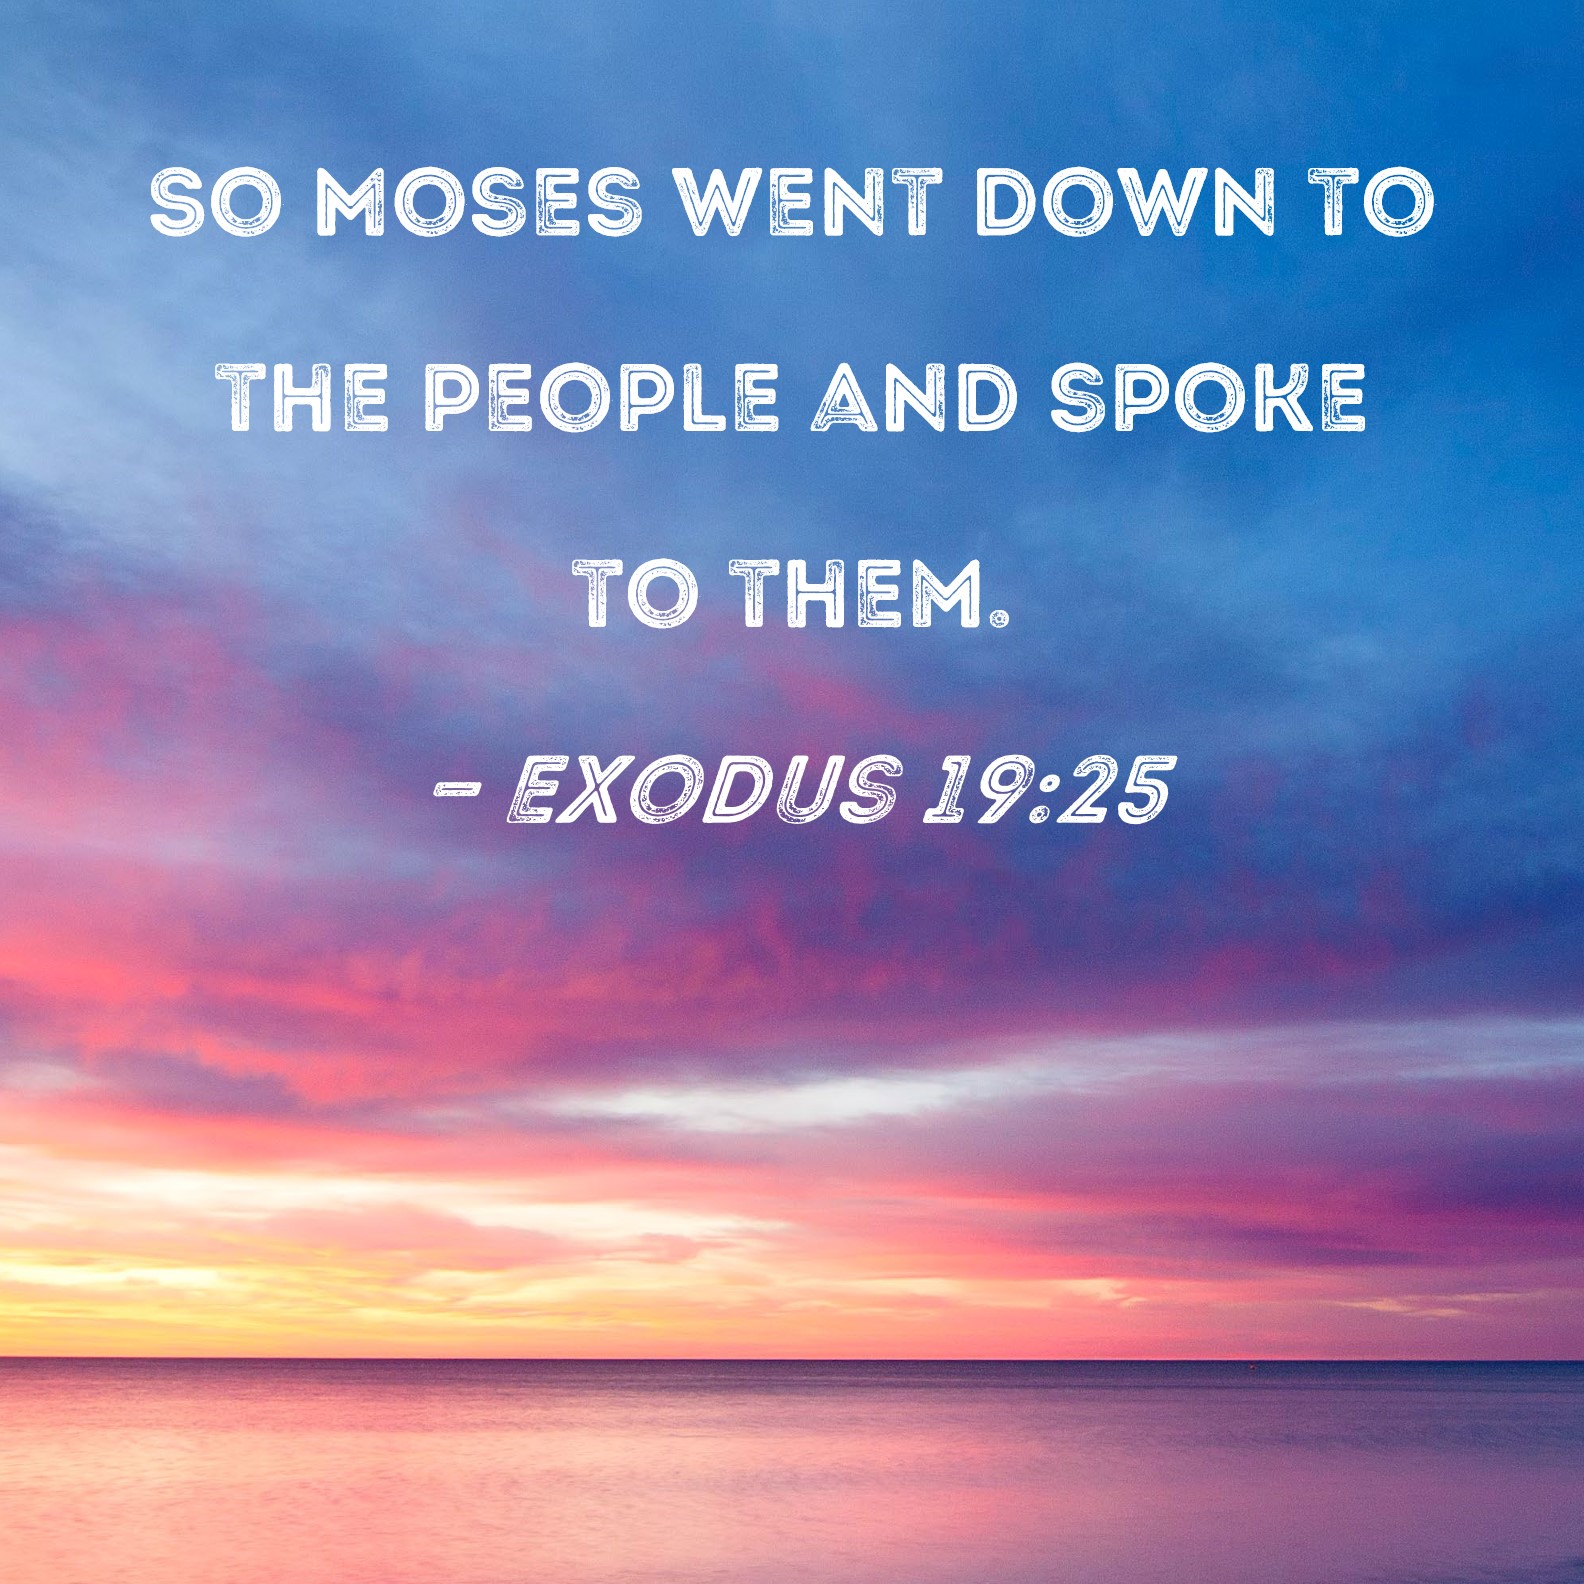 Exodus 19:25 So Moses went down to the people and spoke to them.